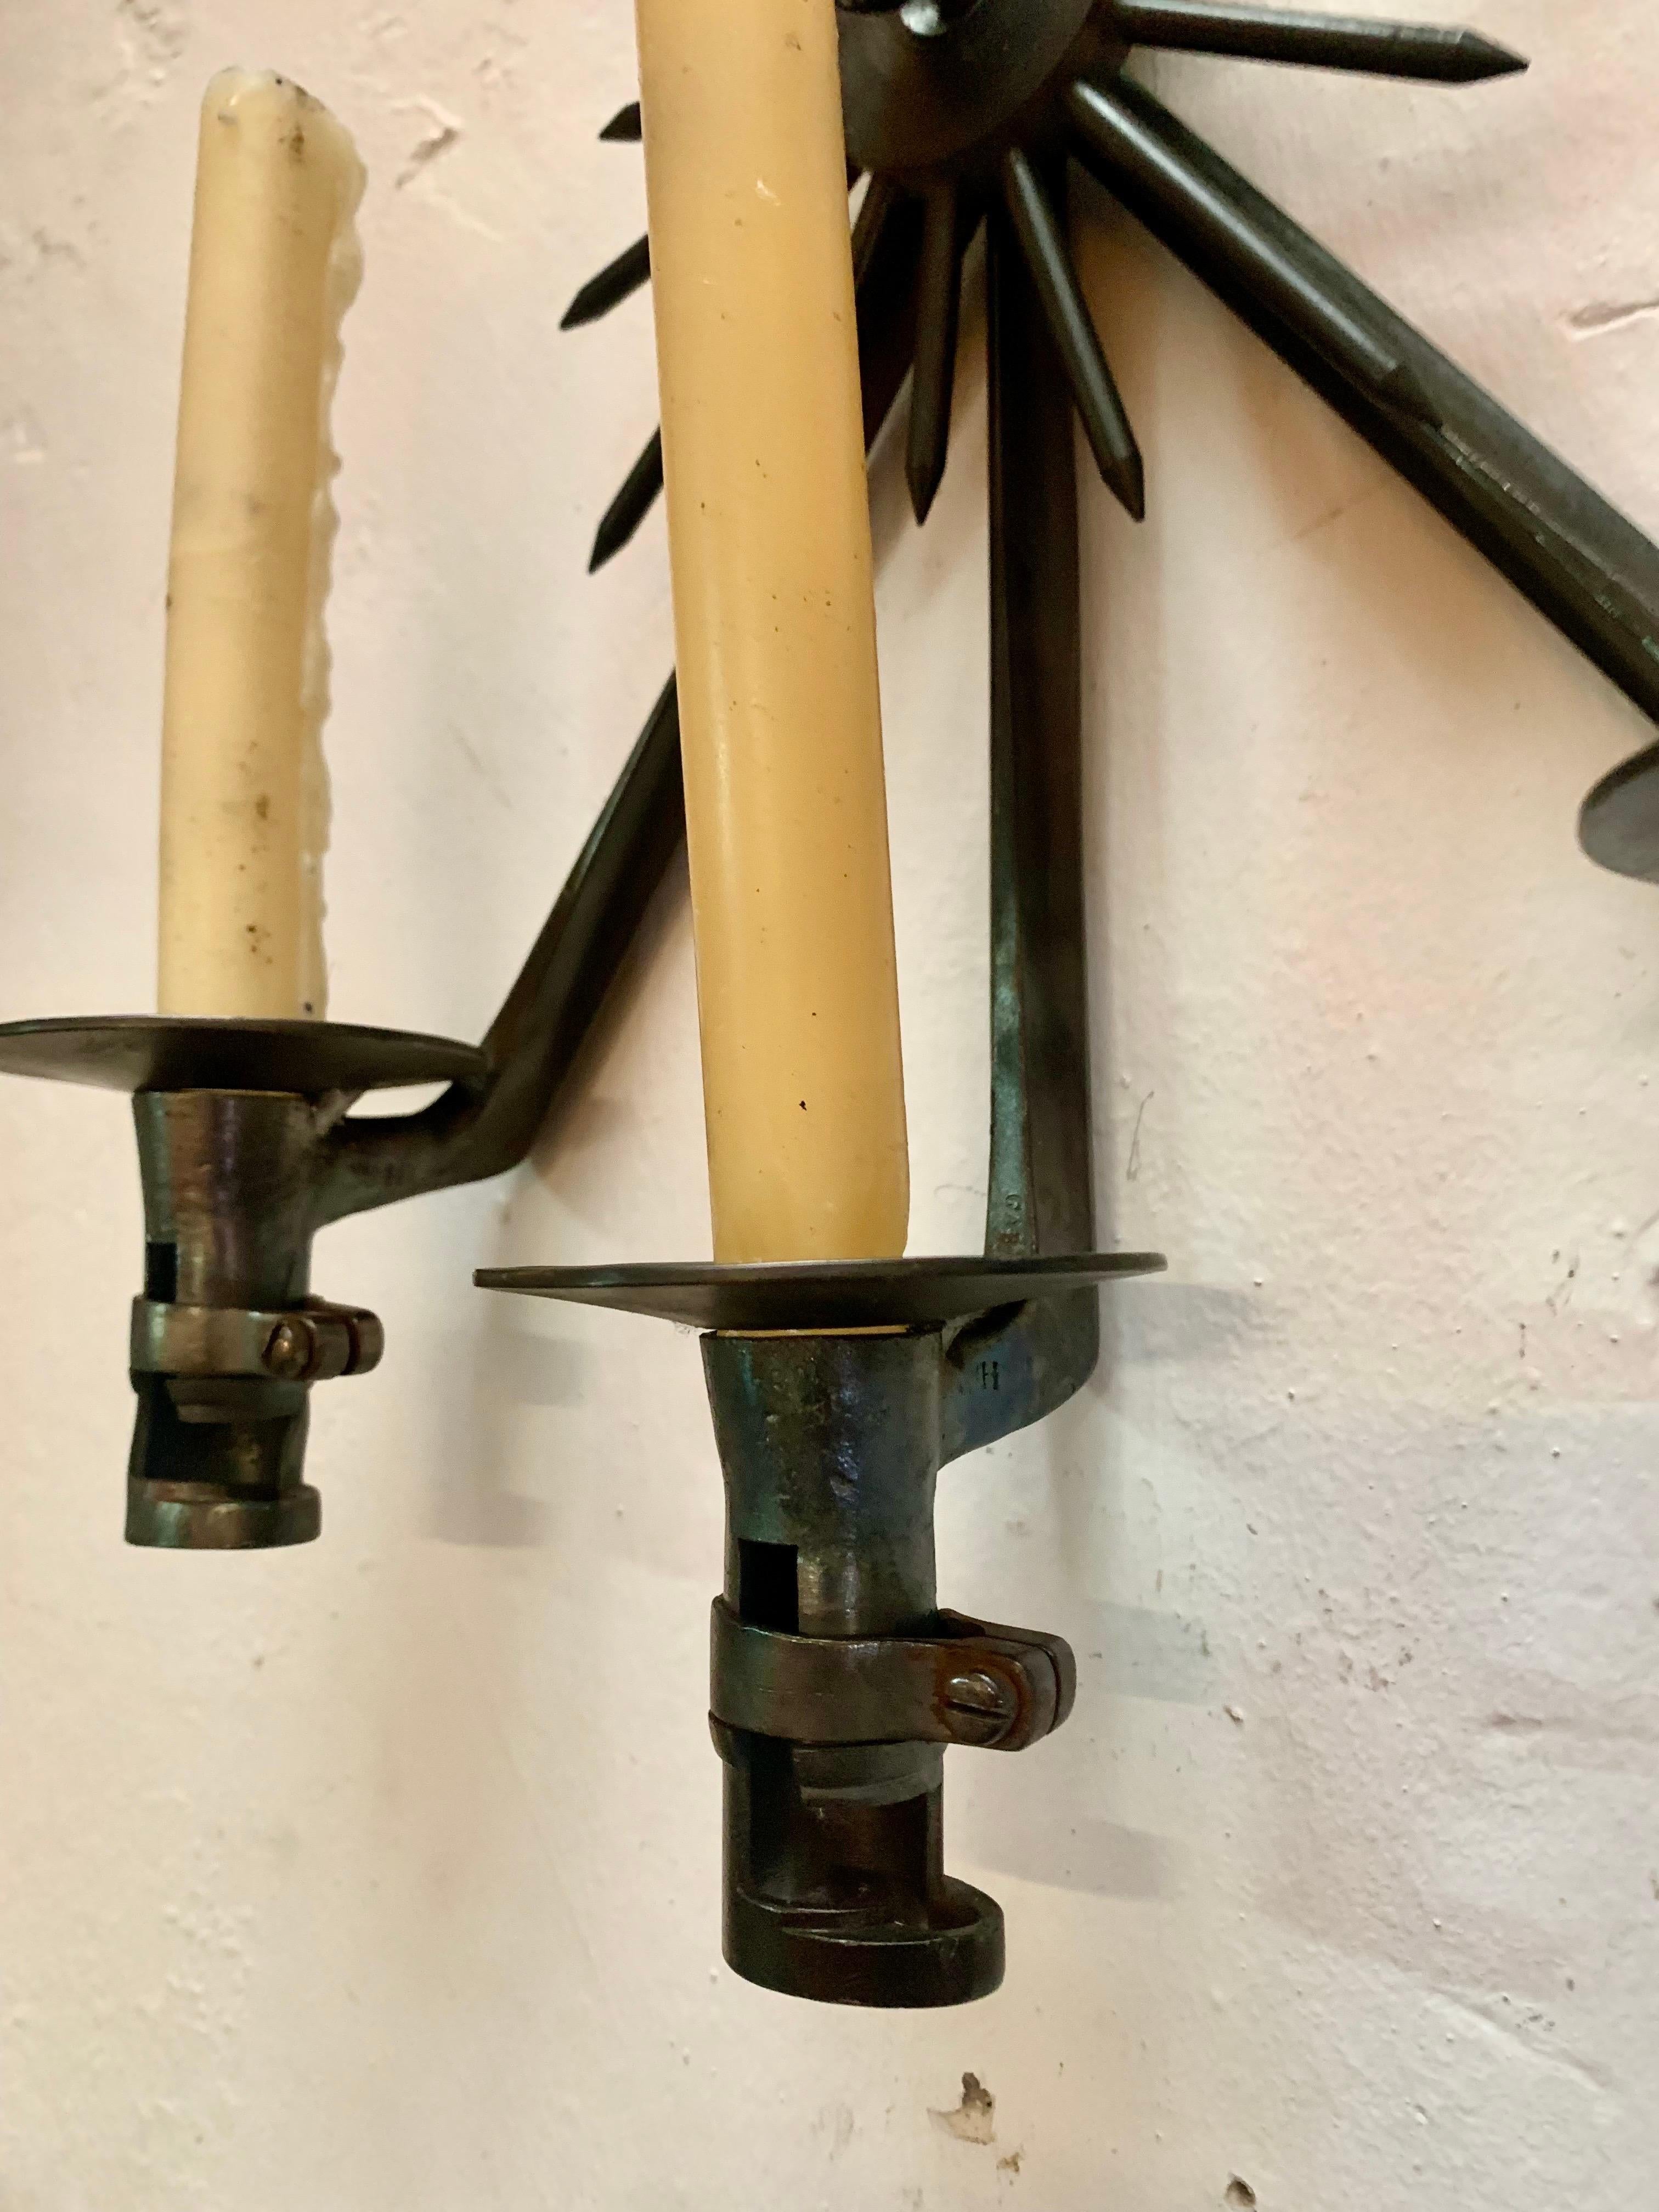 Pair of Apppliques Candle Sconces Made of Antique Bayonets For Sale 2